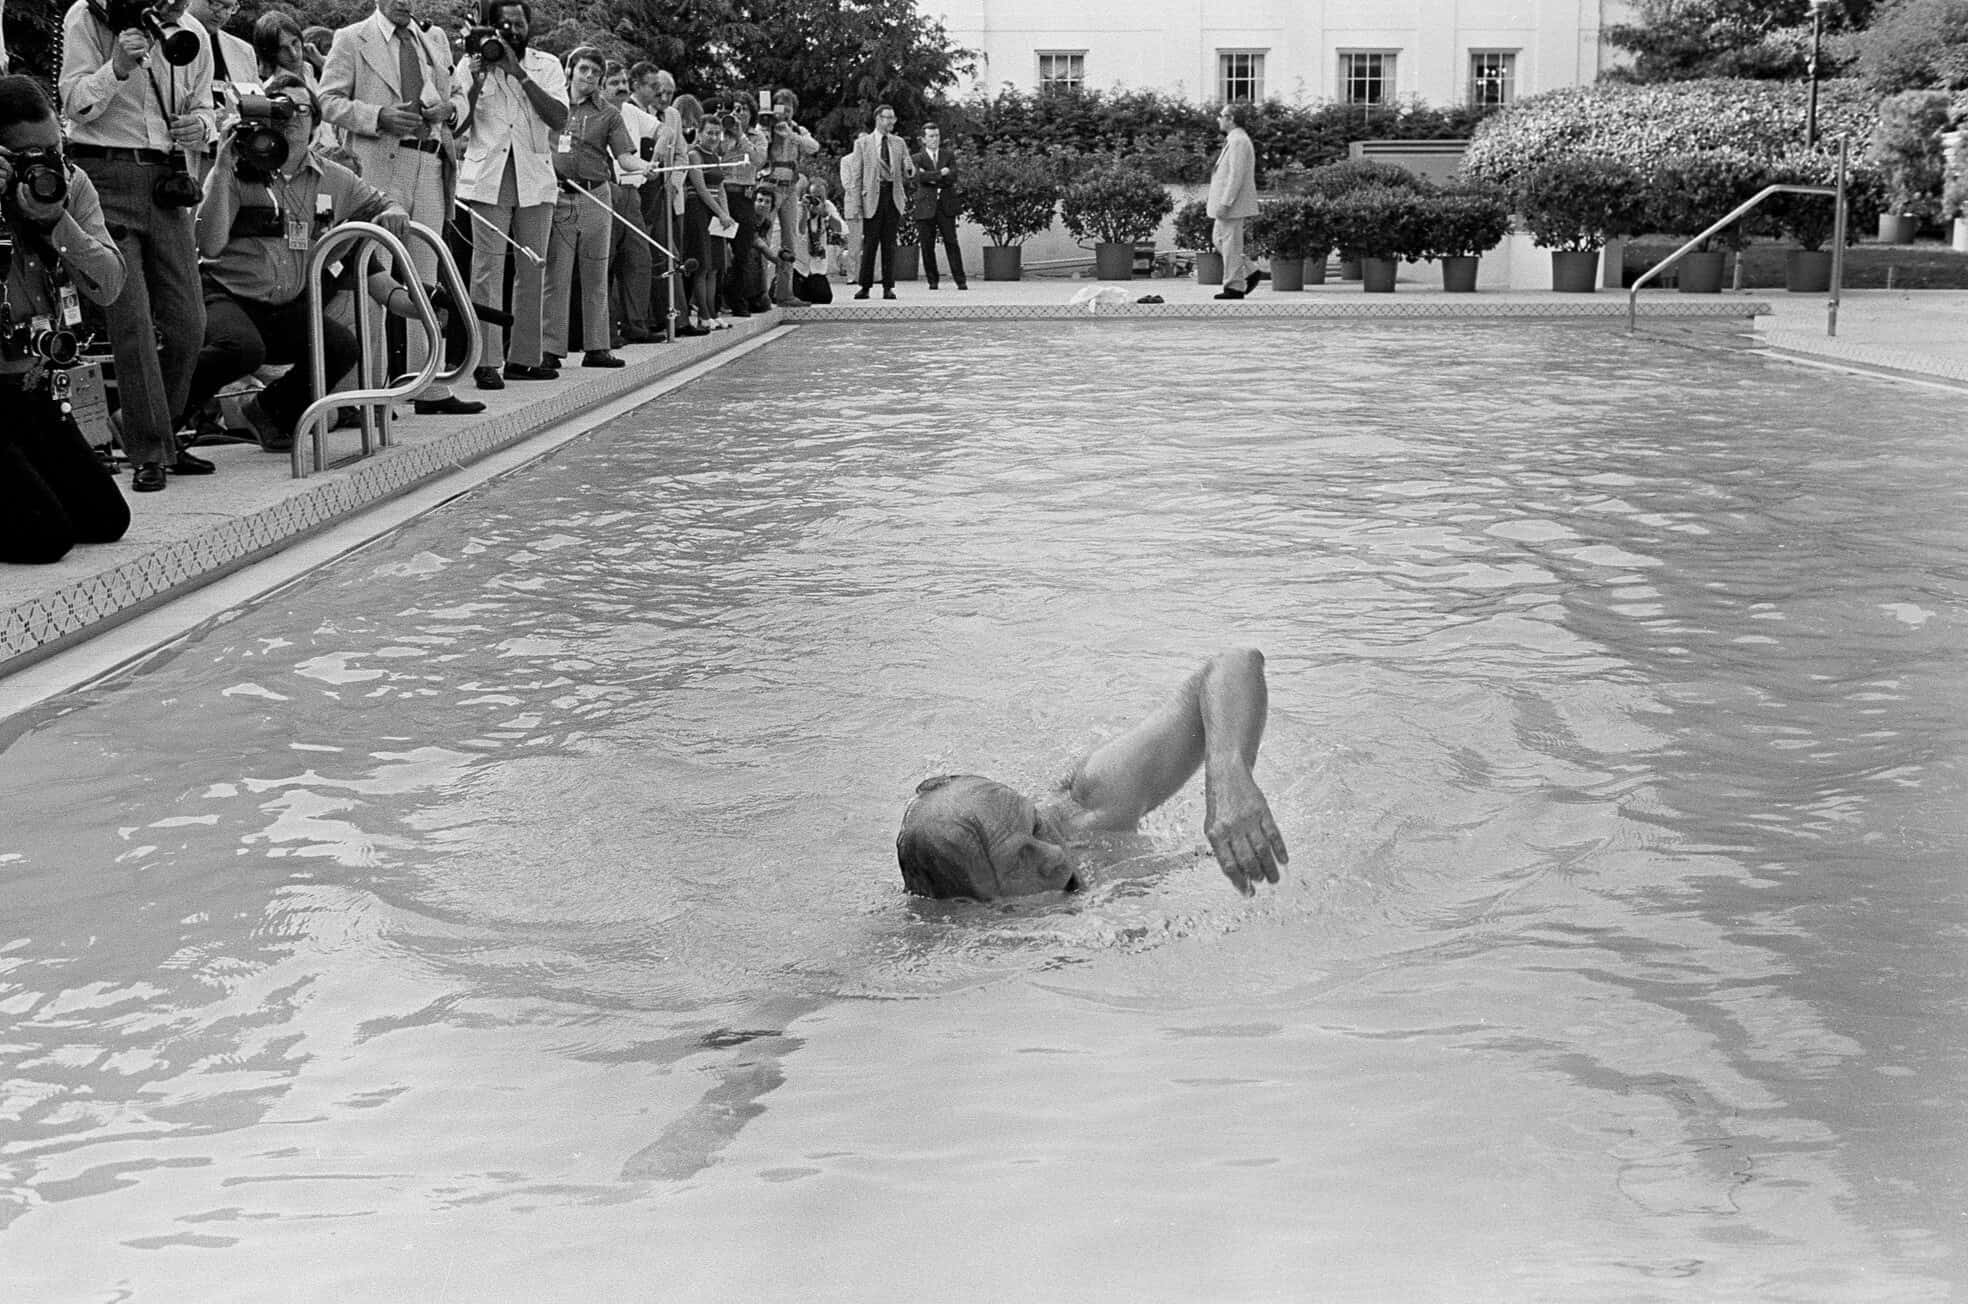 When Did The First Swimming Pool Open In The U.S.